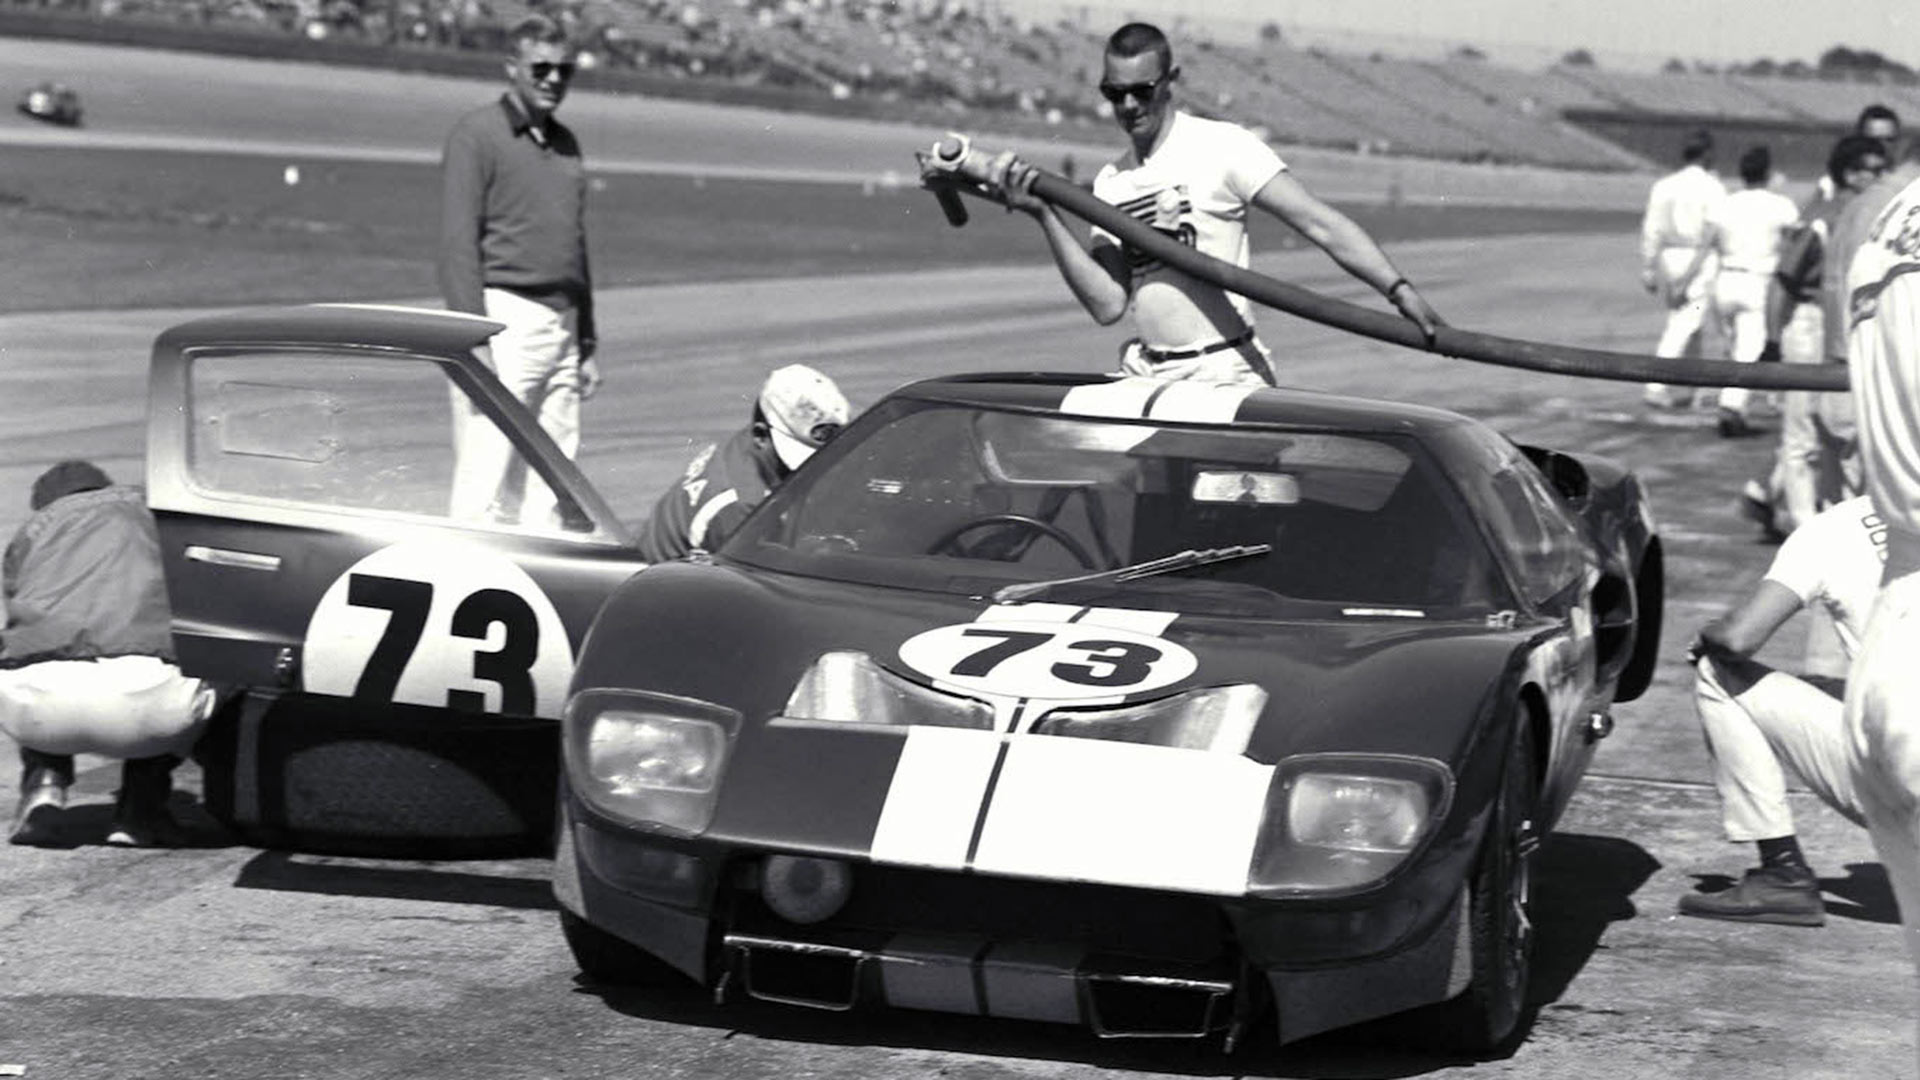 How Ford's GT40 beat Ferrari and became a Le Mans legend, British GQ